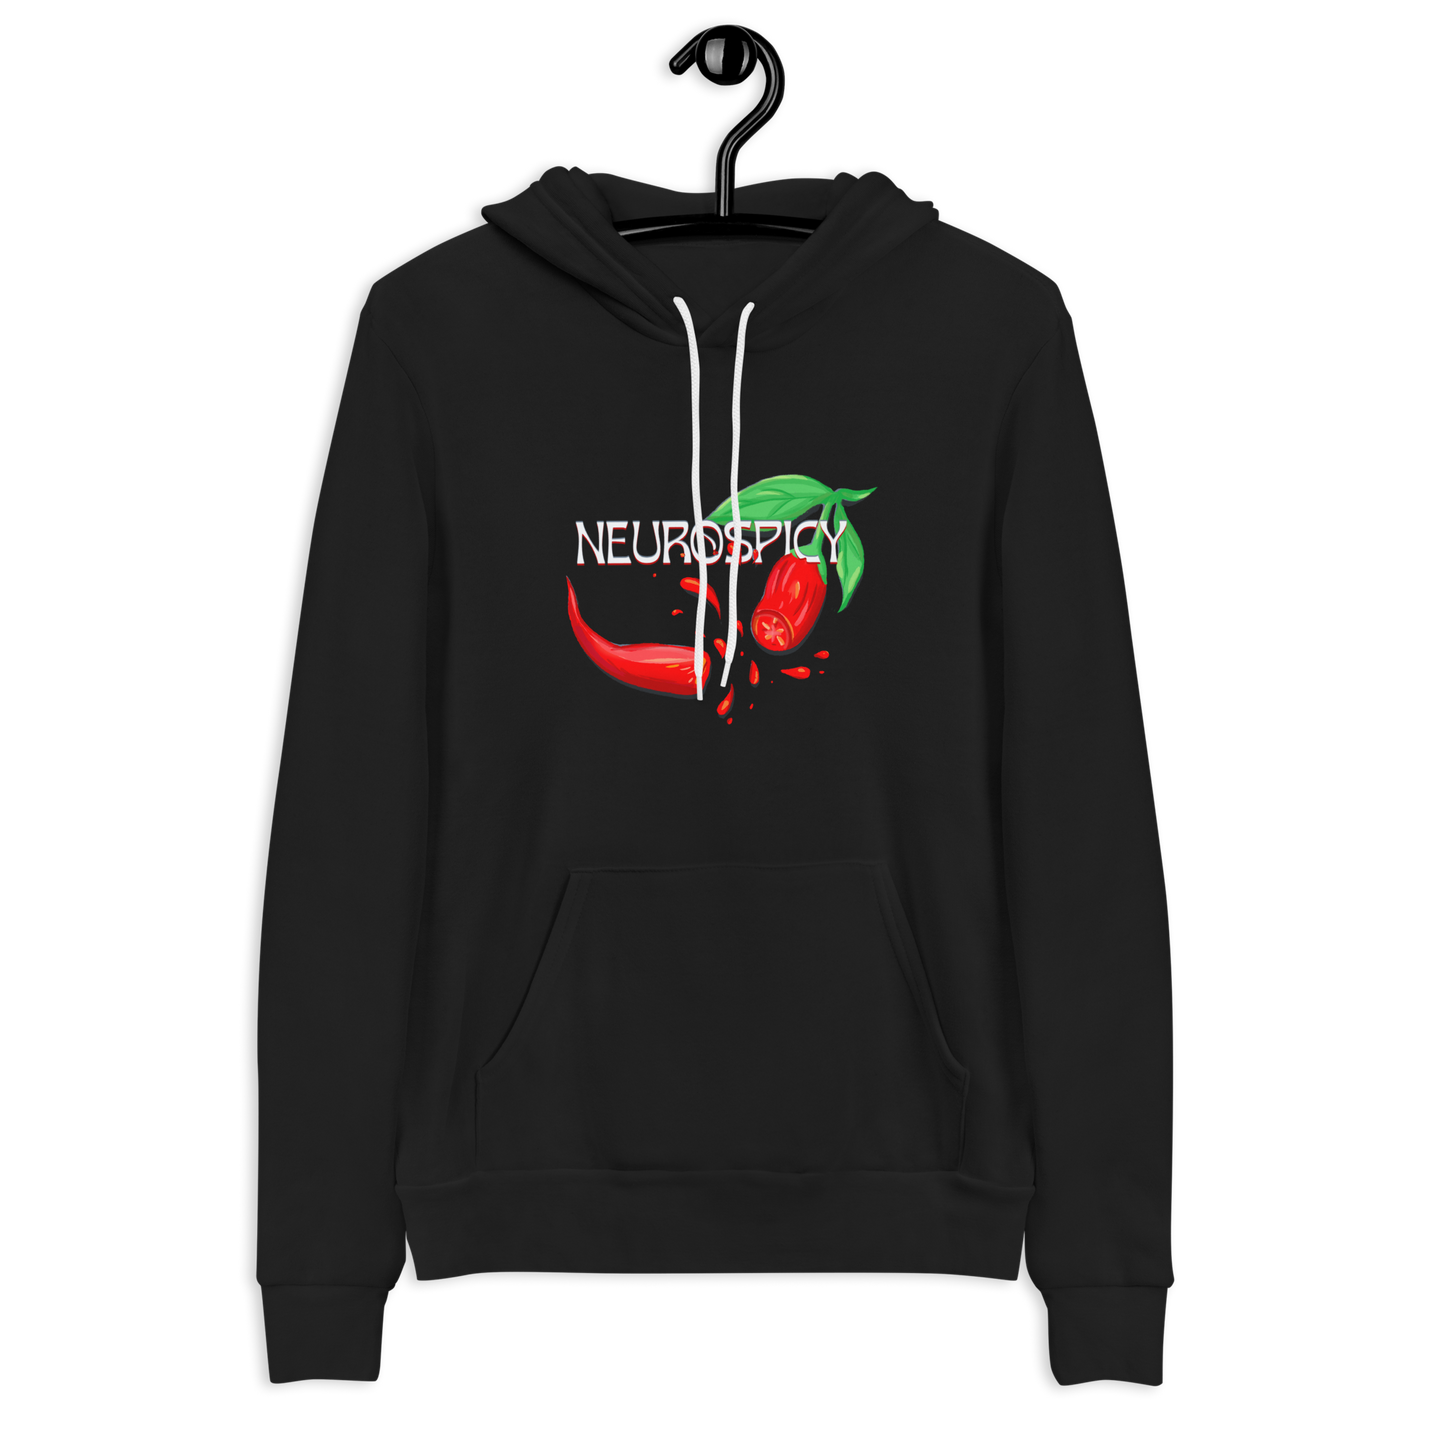 Neurospicy hoodie from Invisible Illness Club